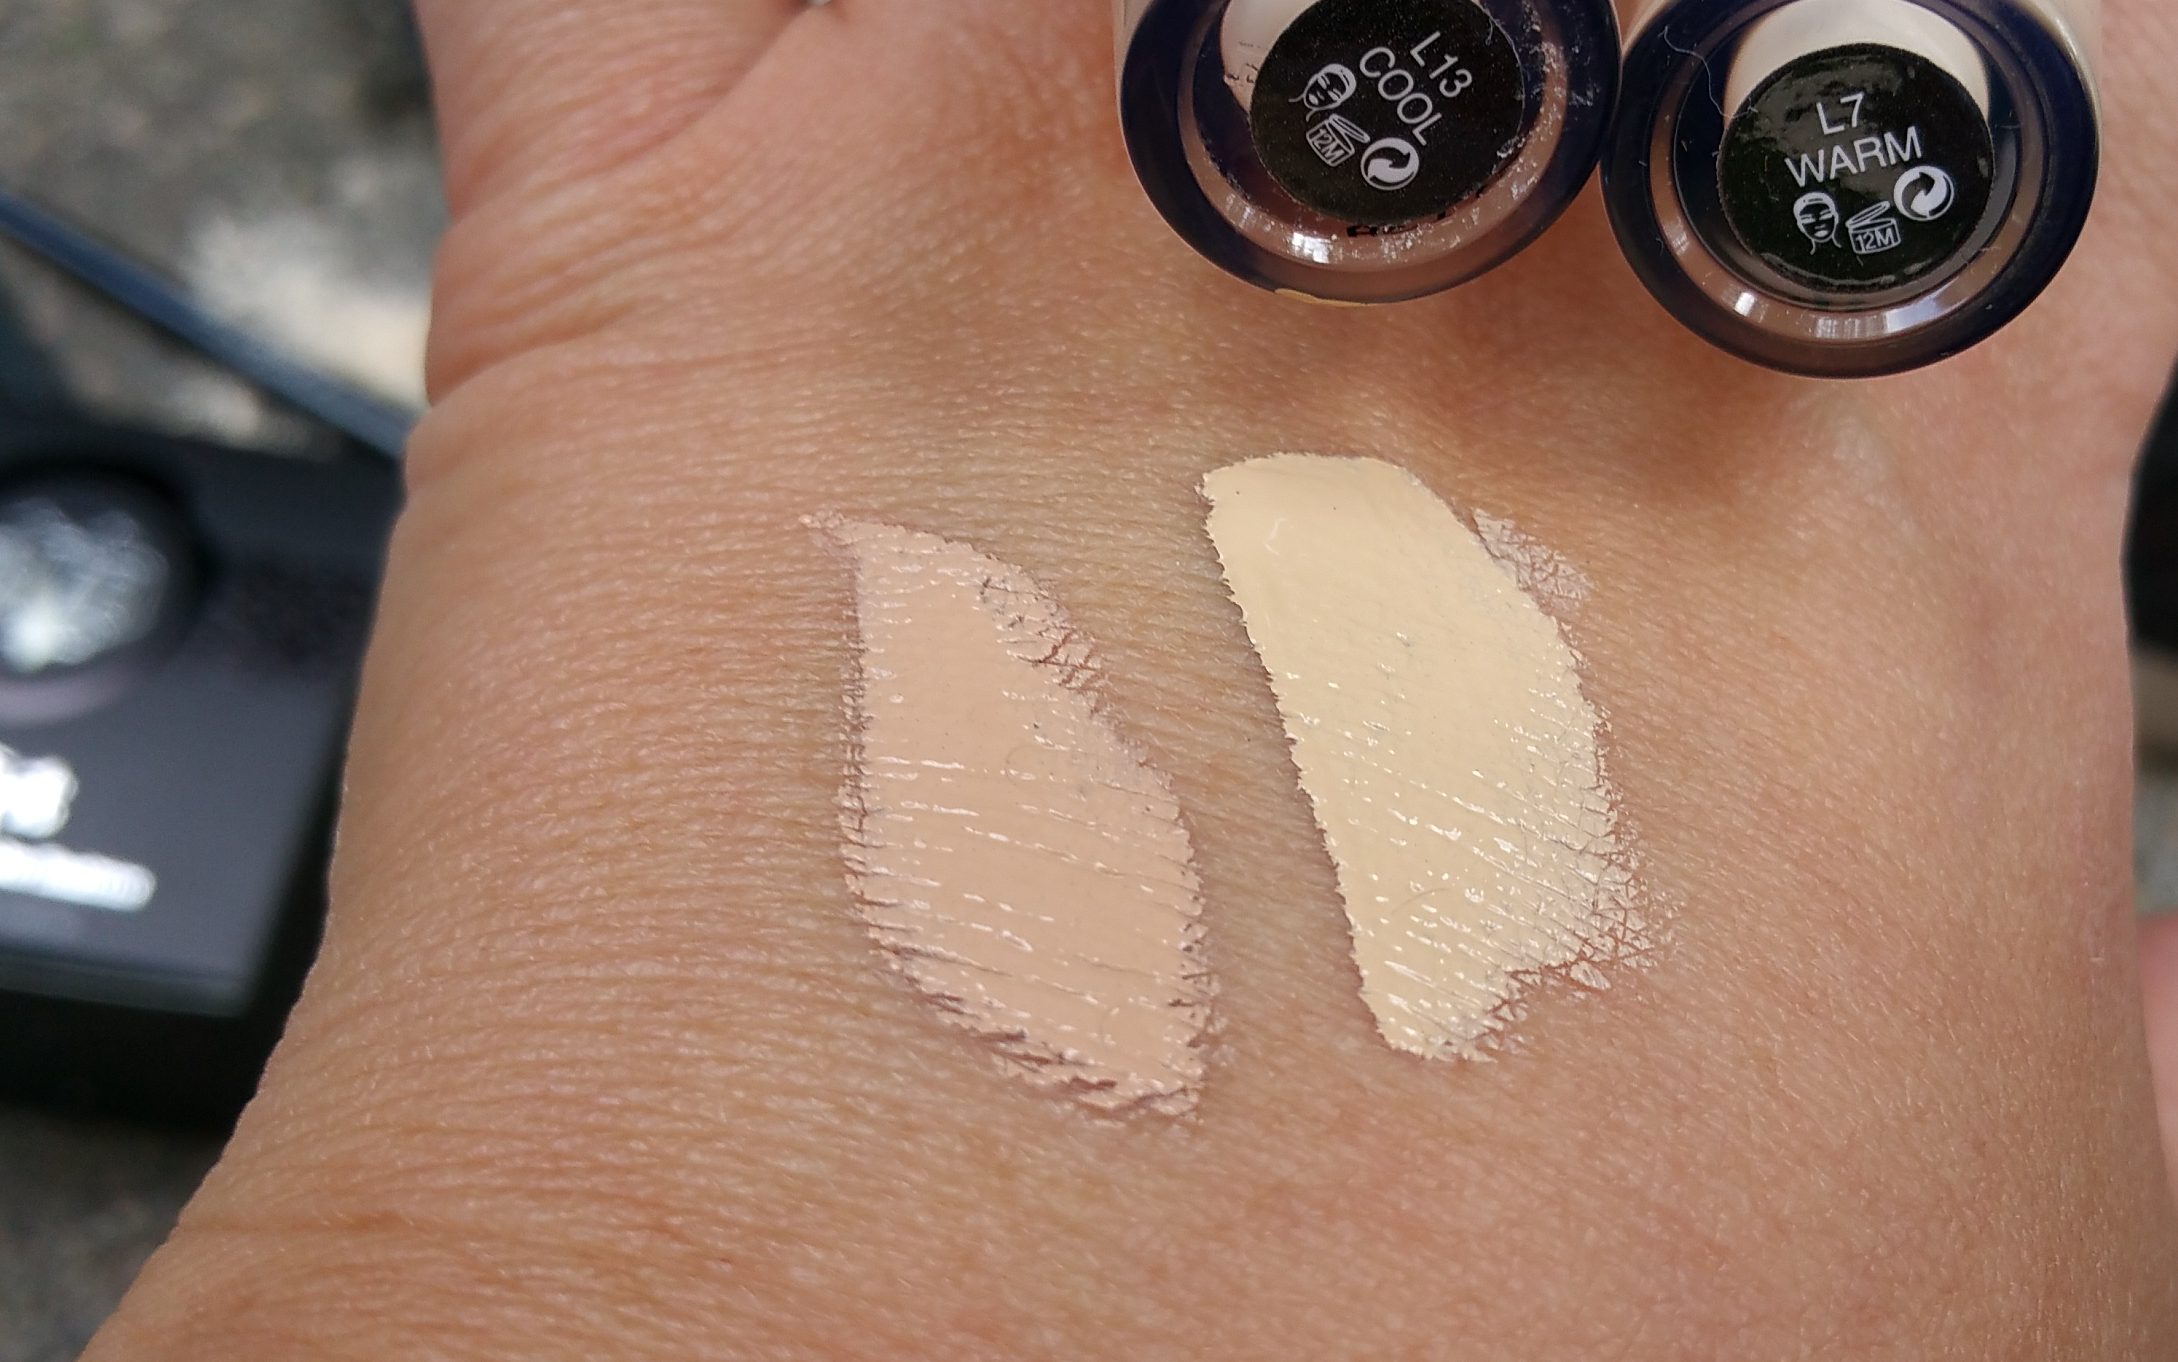 Kat Von D Beauty Lock-It Creme Concealers, in shades L13 (Cool) and L7 (Warm), left to right.